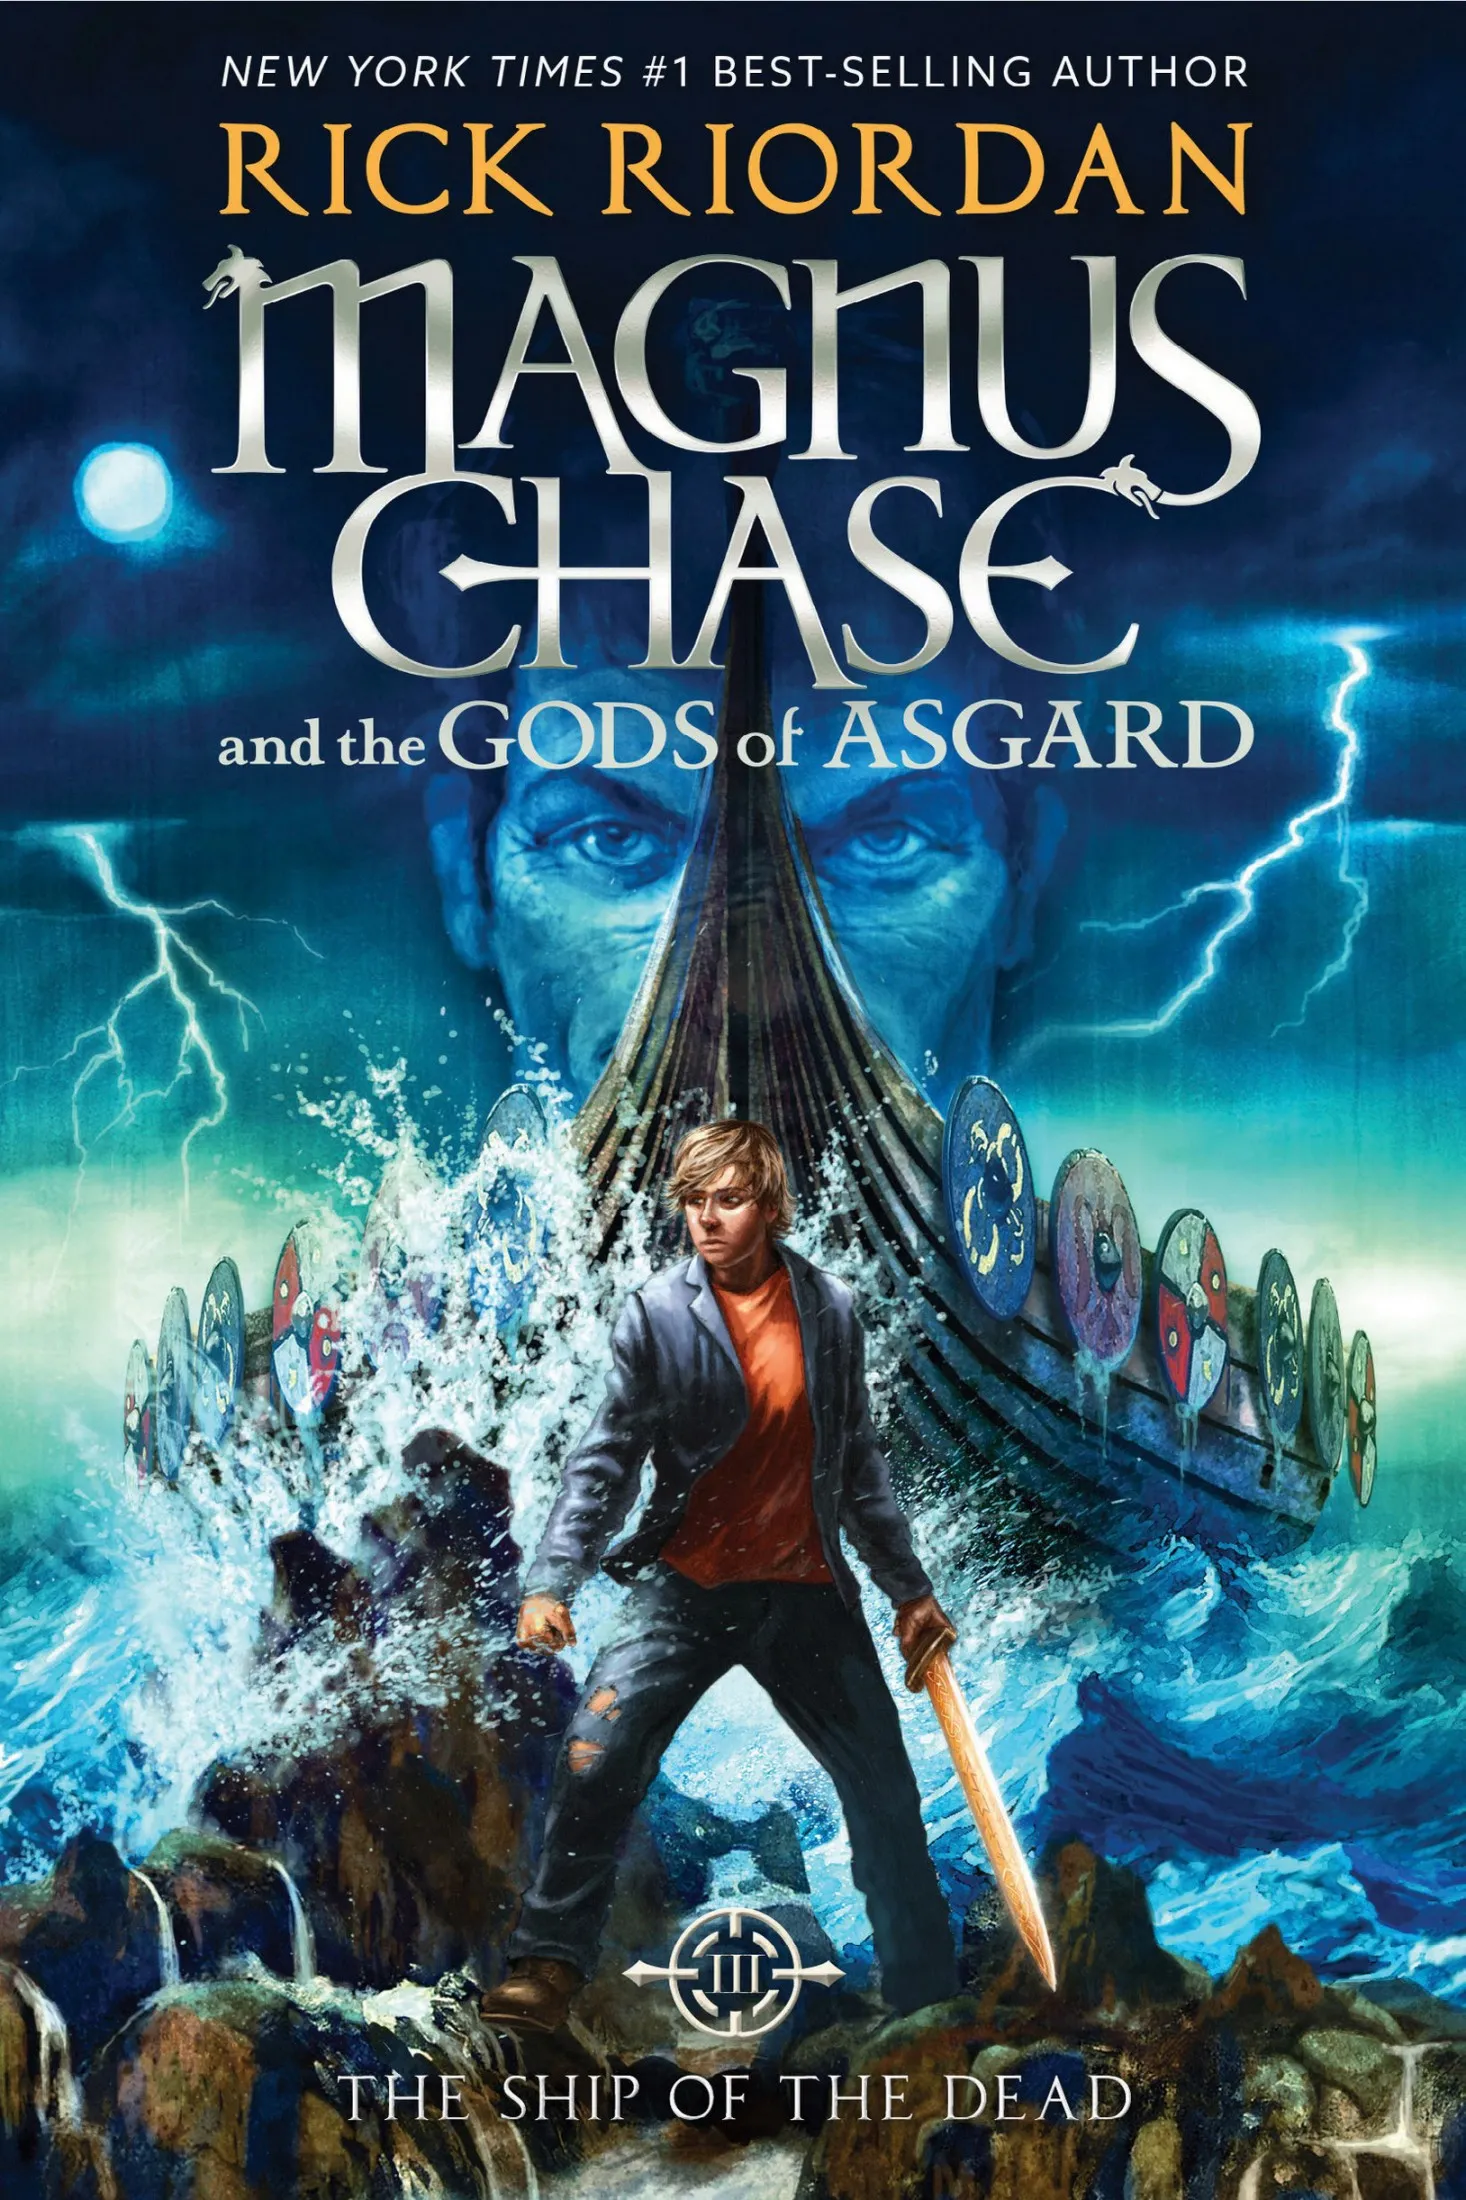 The Ship of the Dead (Magnus Chase and the Gods of Asgard #3)